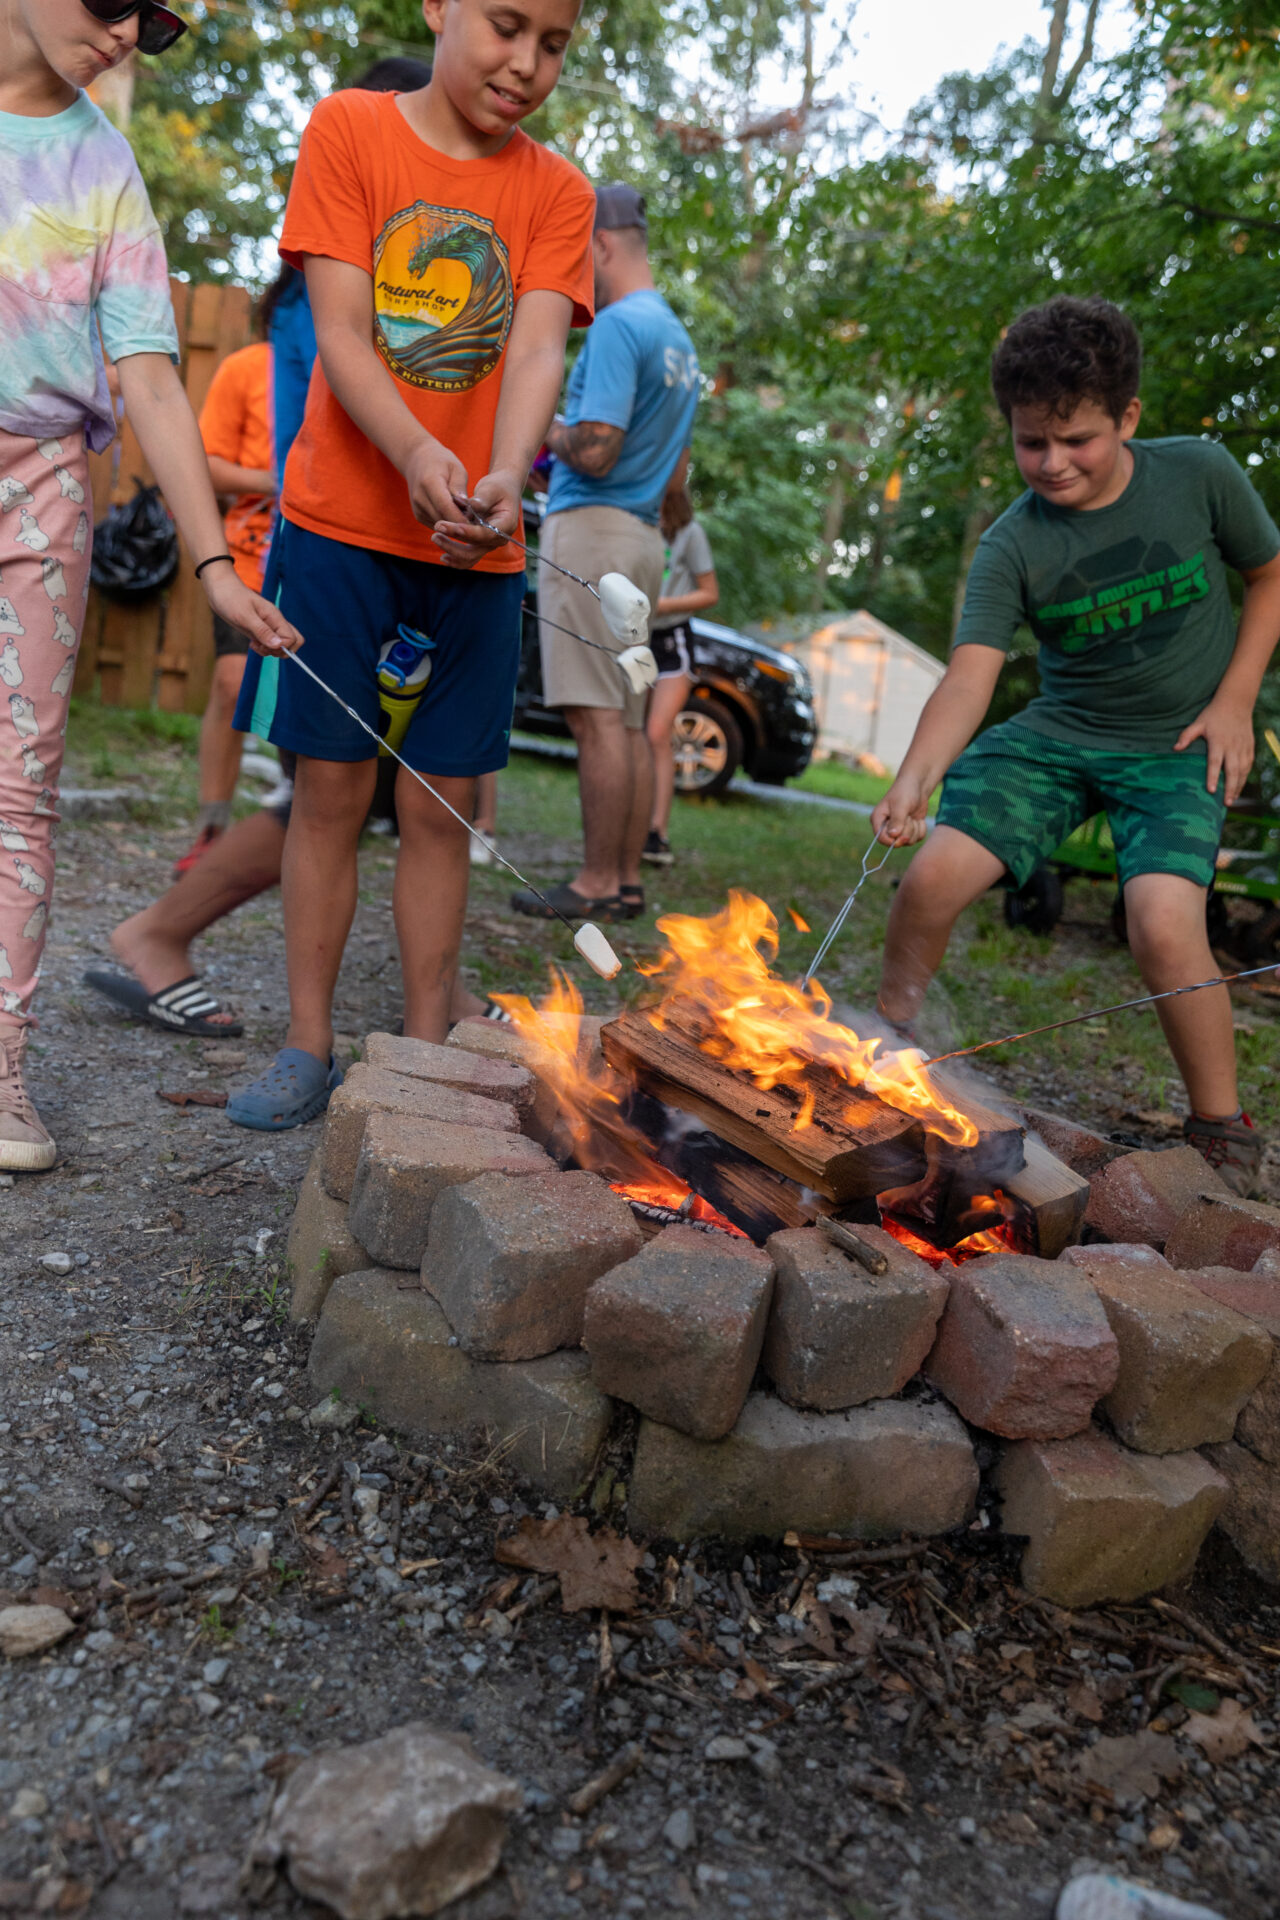 A group of kids gathered around a campfire, sharing stories and roasting marshmallows.